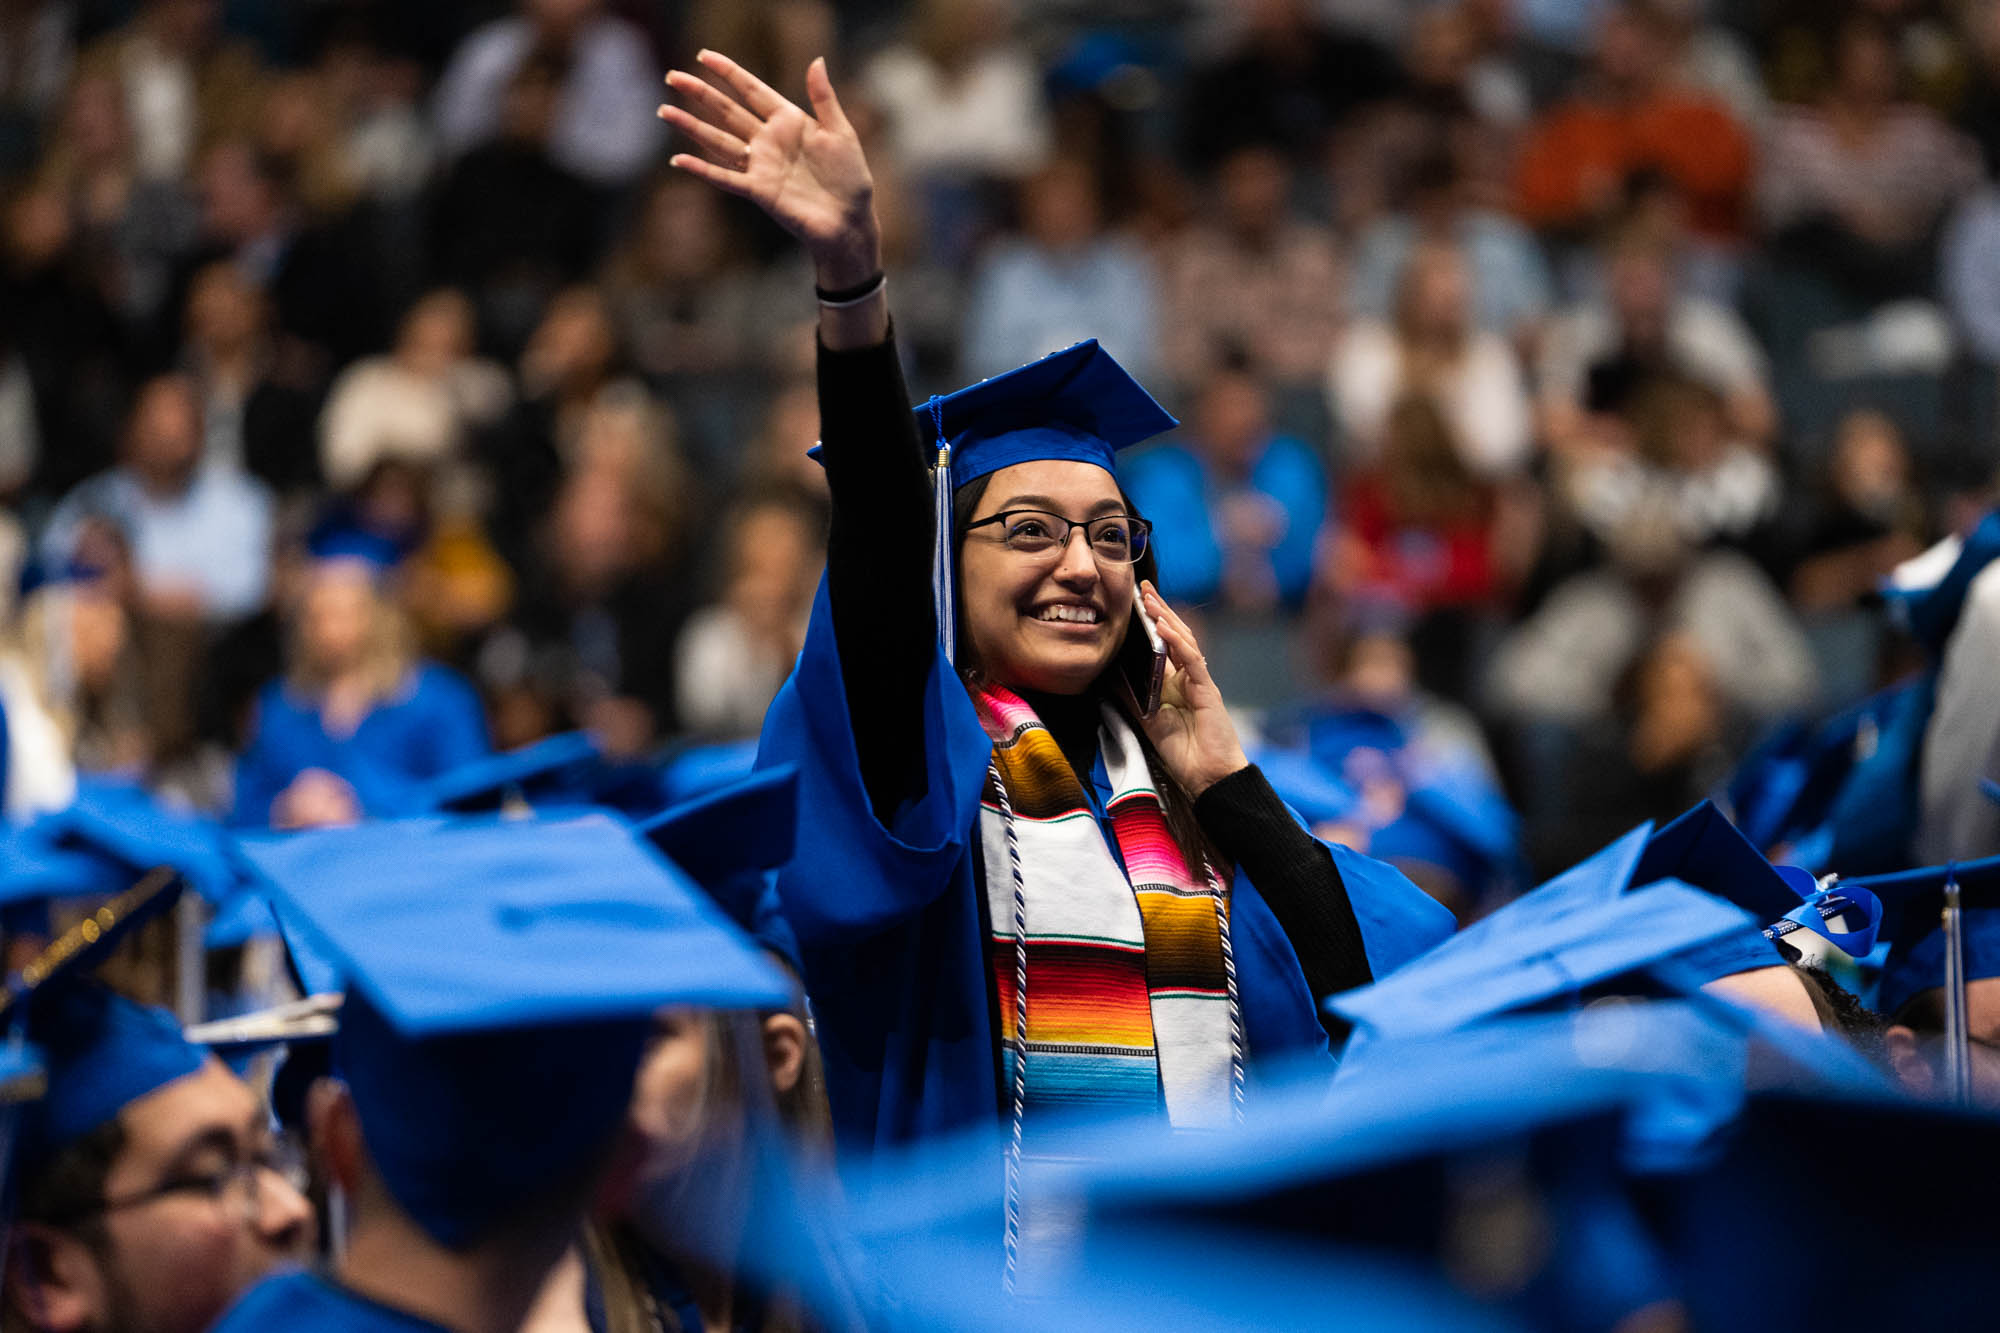 GVSU Fall class of 2022 honored in Commencement ceremony at Van Andel